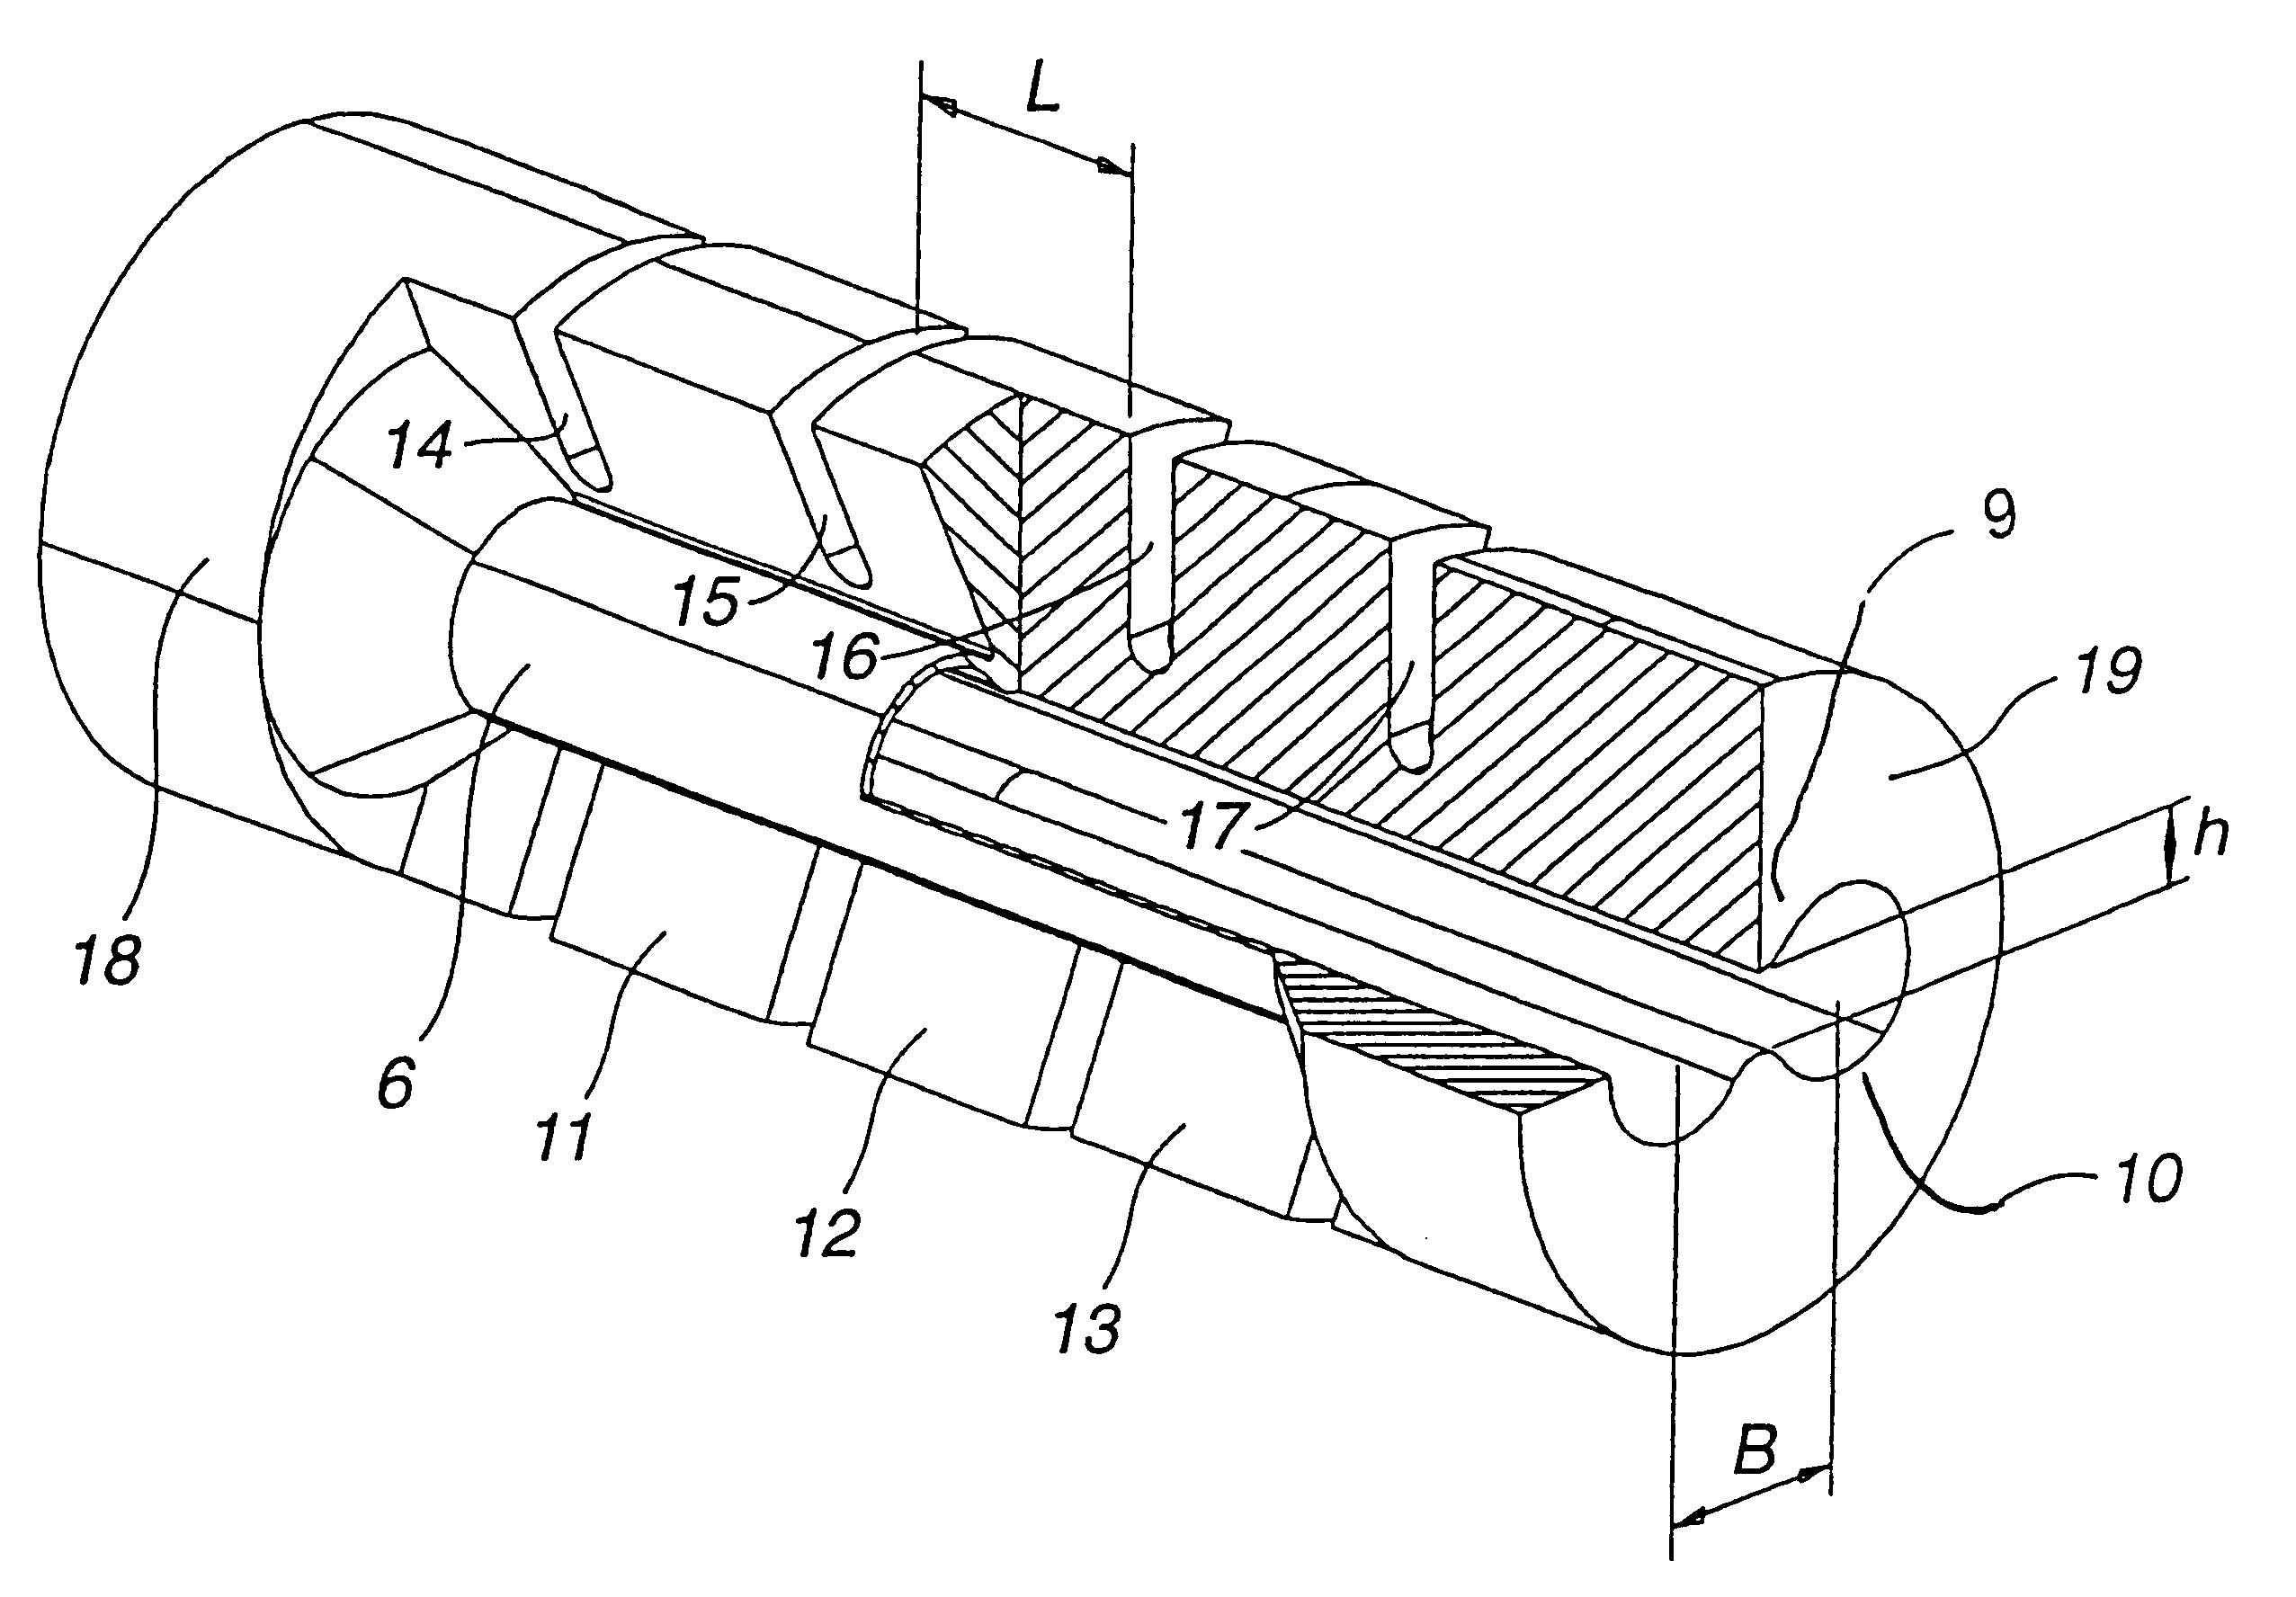 Pressure sensor for measurement of gas pressure in a cylinder of a combustion engine